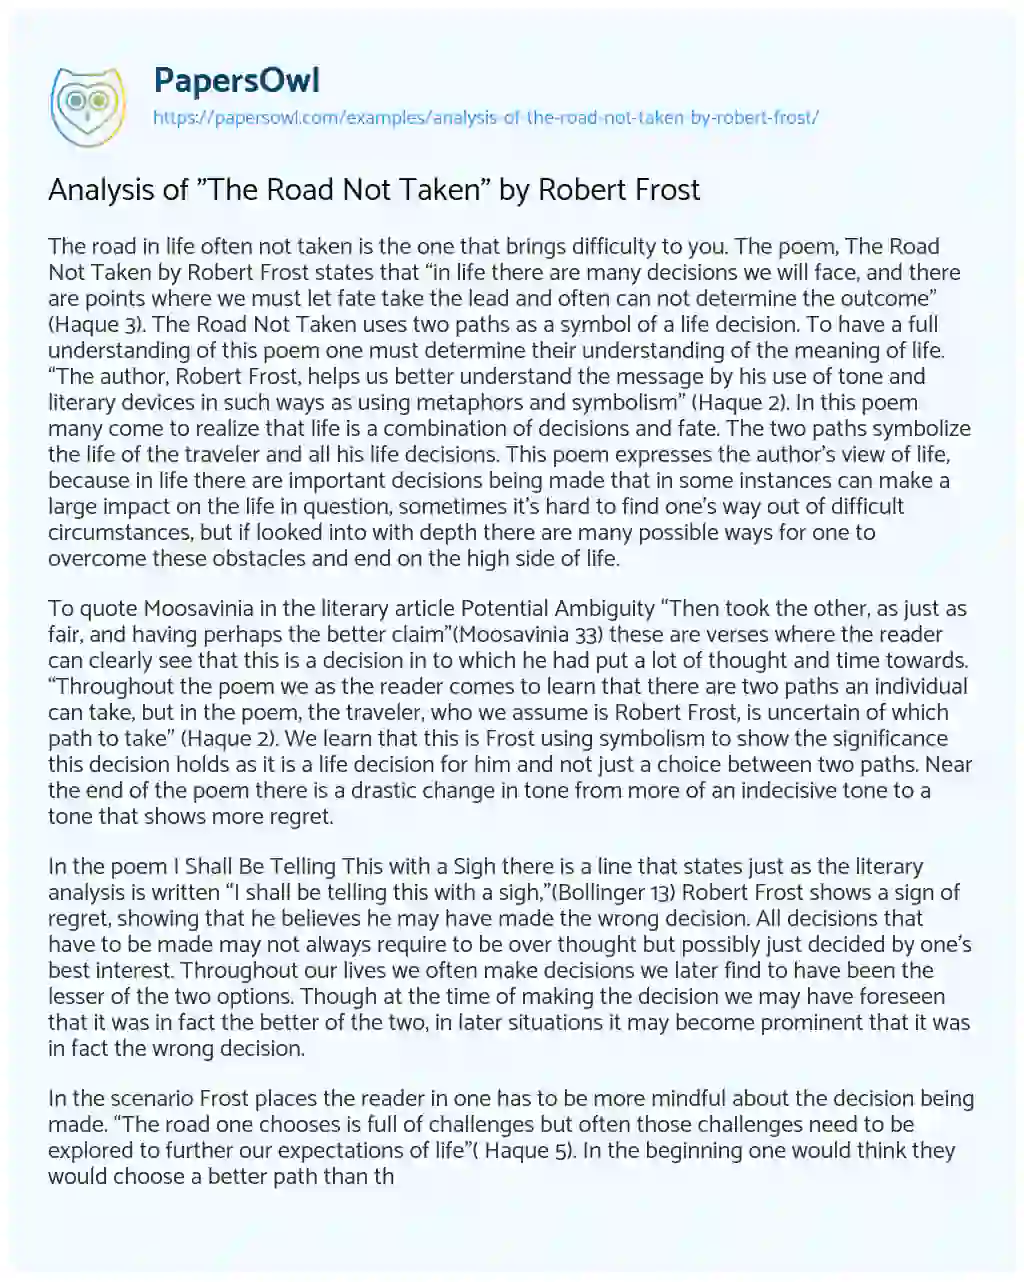 Essay on Analysis of “The Road not Taken” by Robert Frost